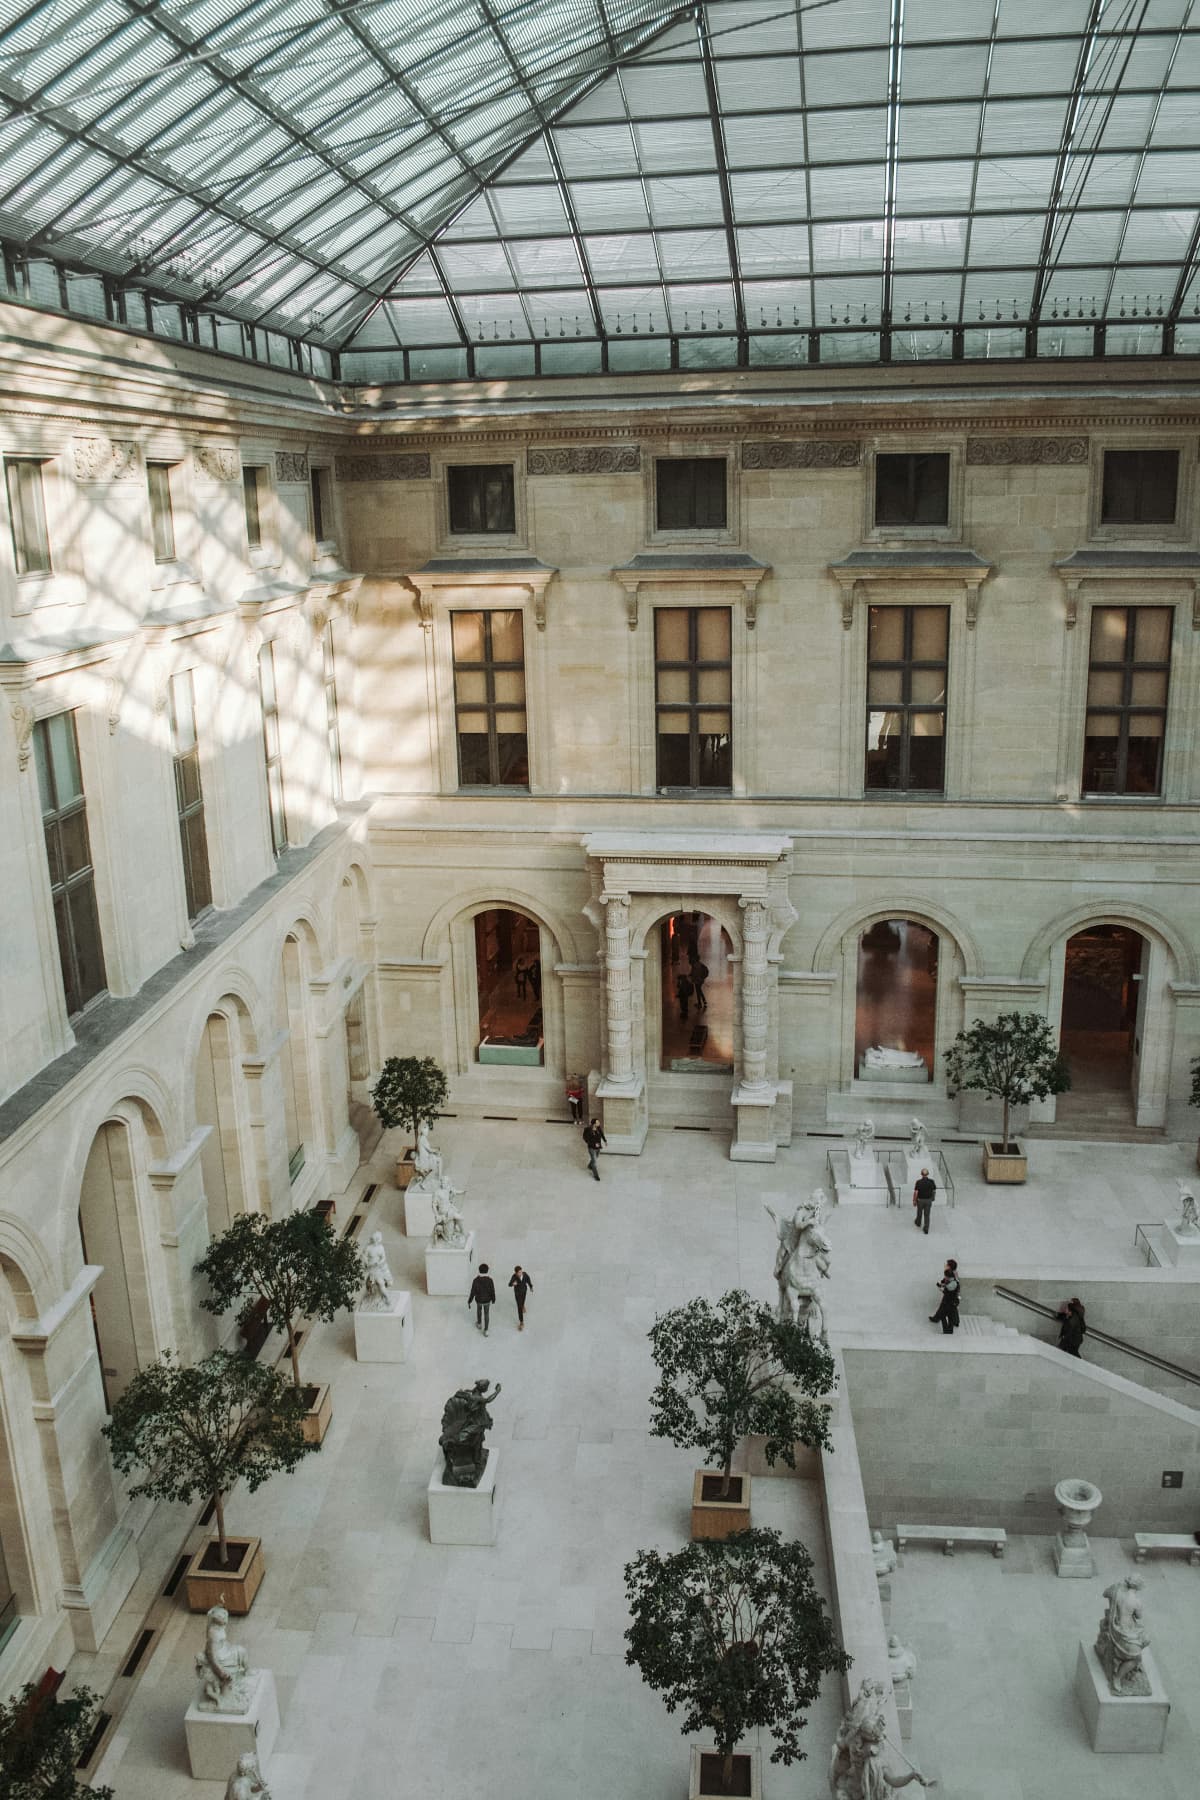 A courtyard inside the Louvre with a view of the glass roof